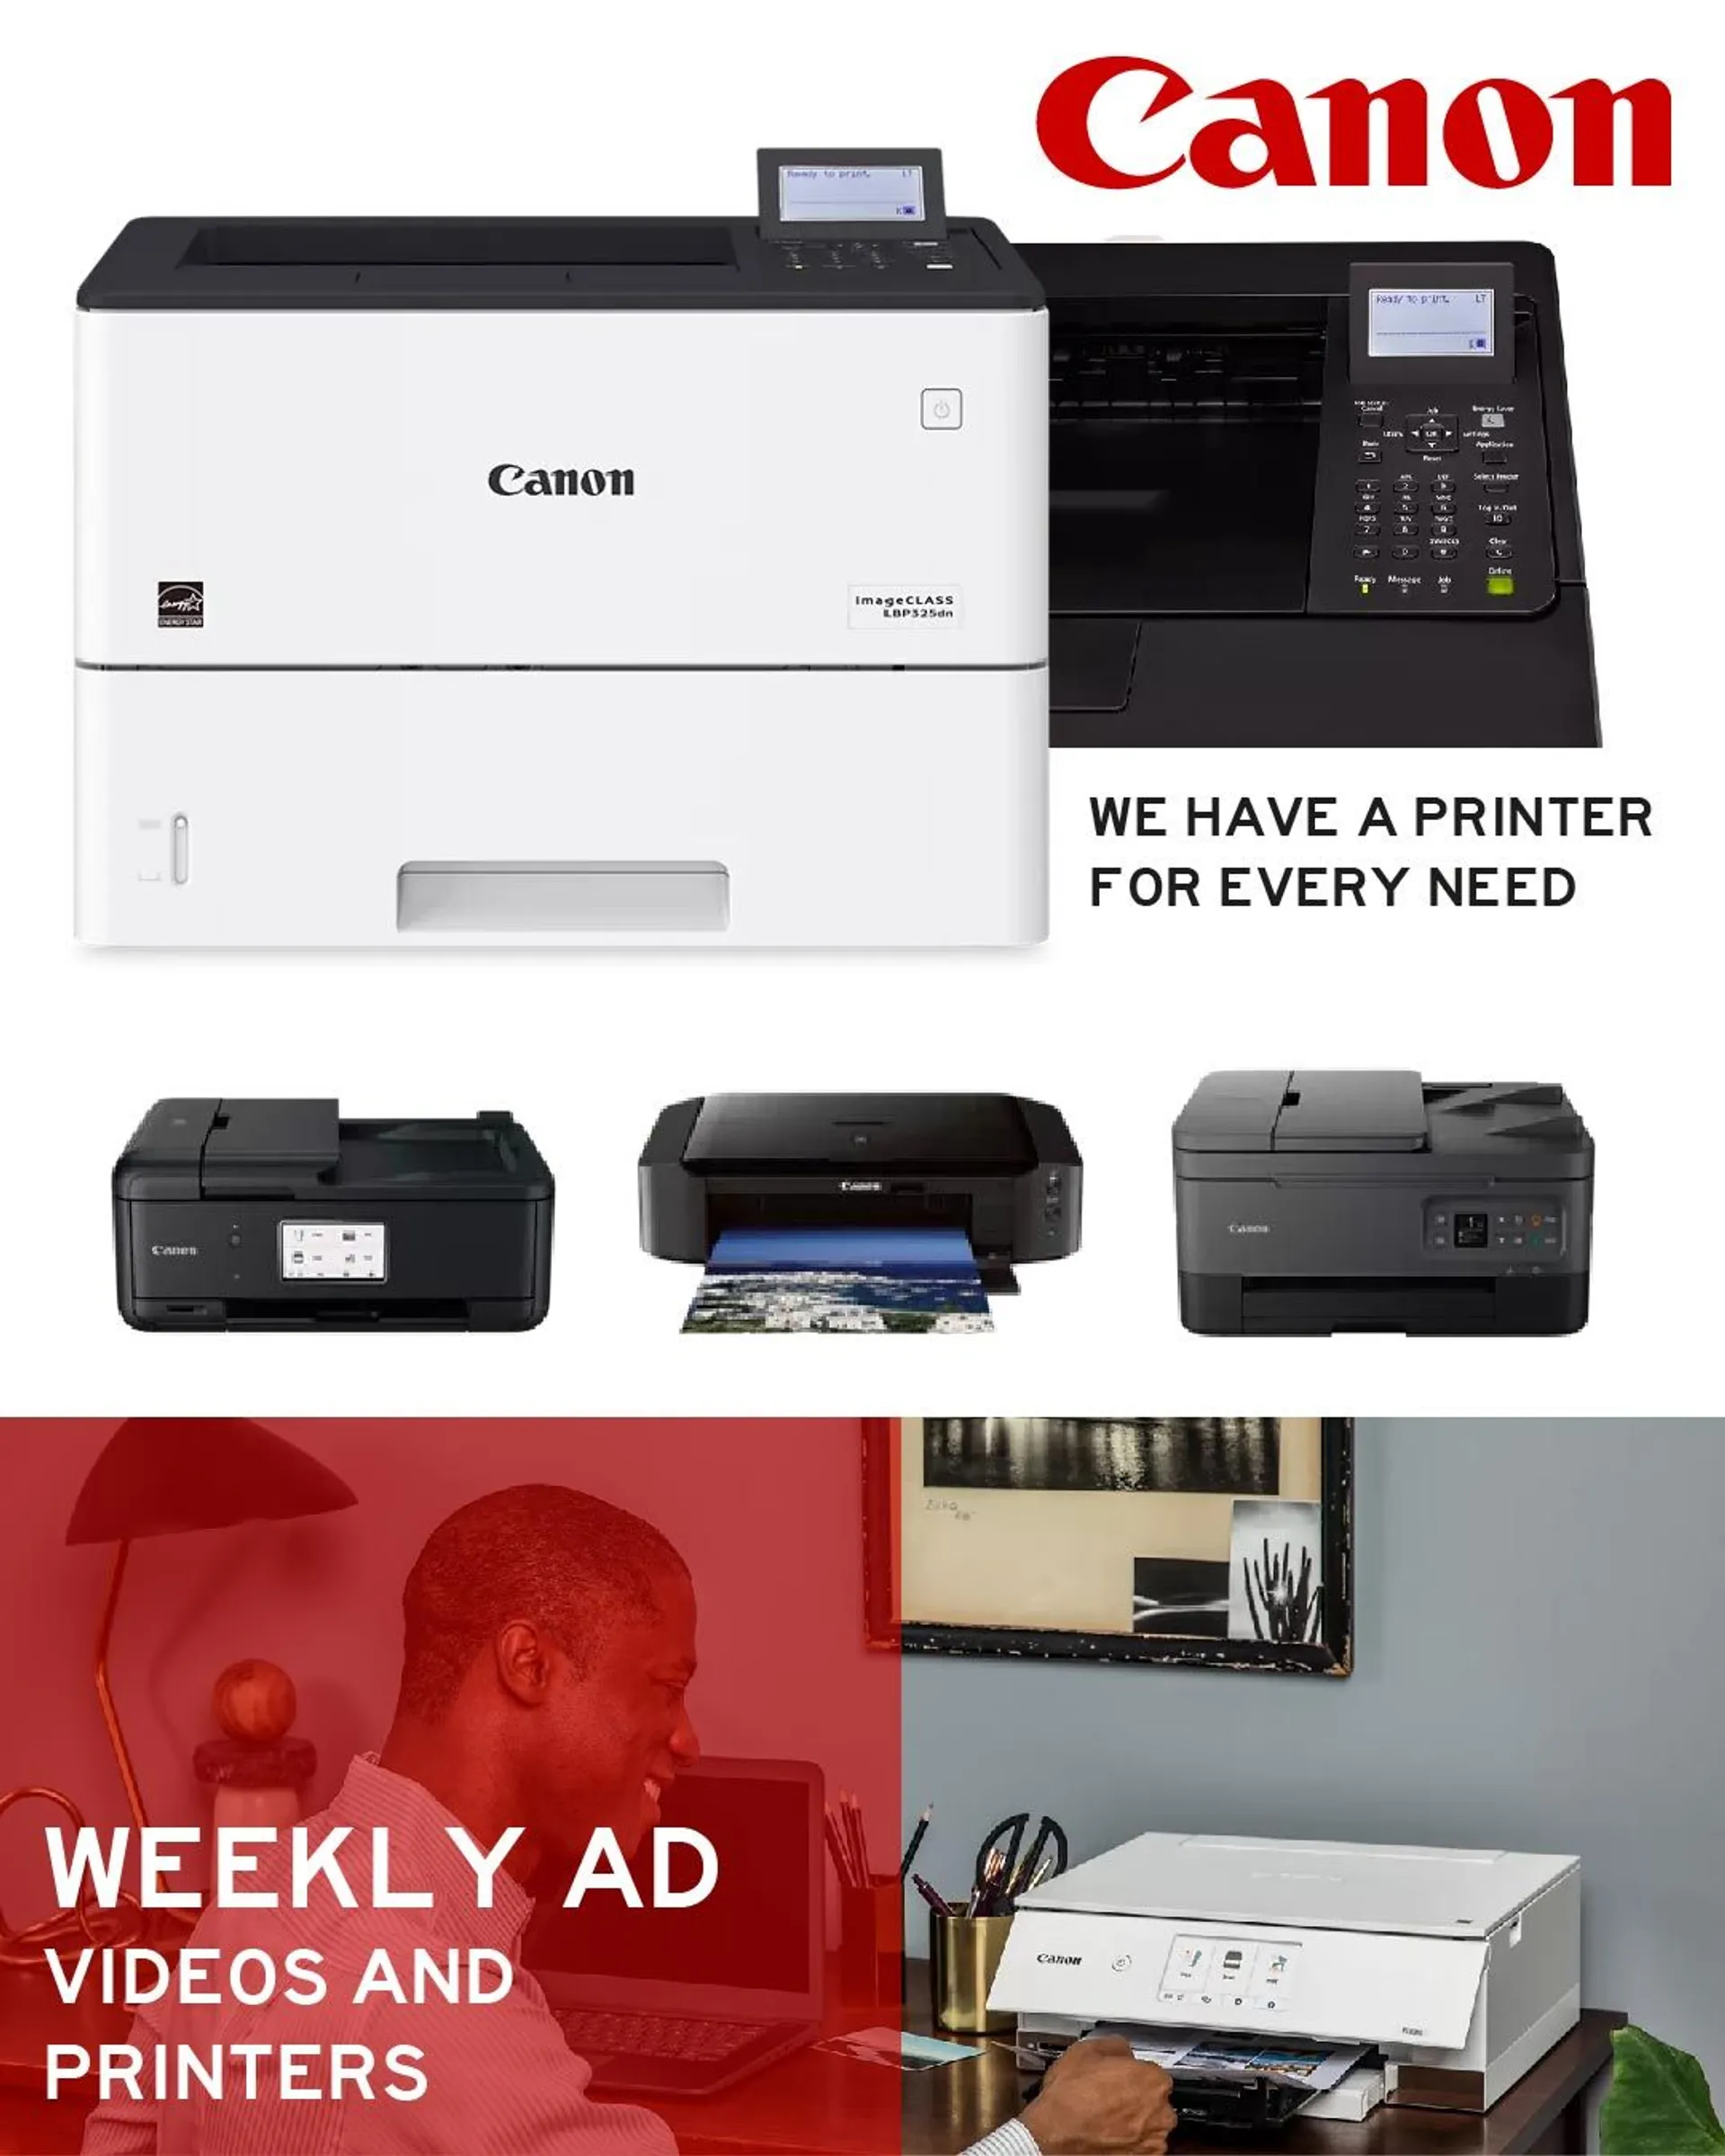 Canon - Electronics Video and Printers